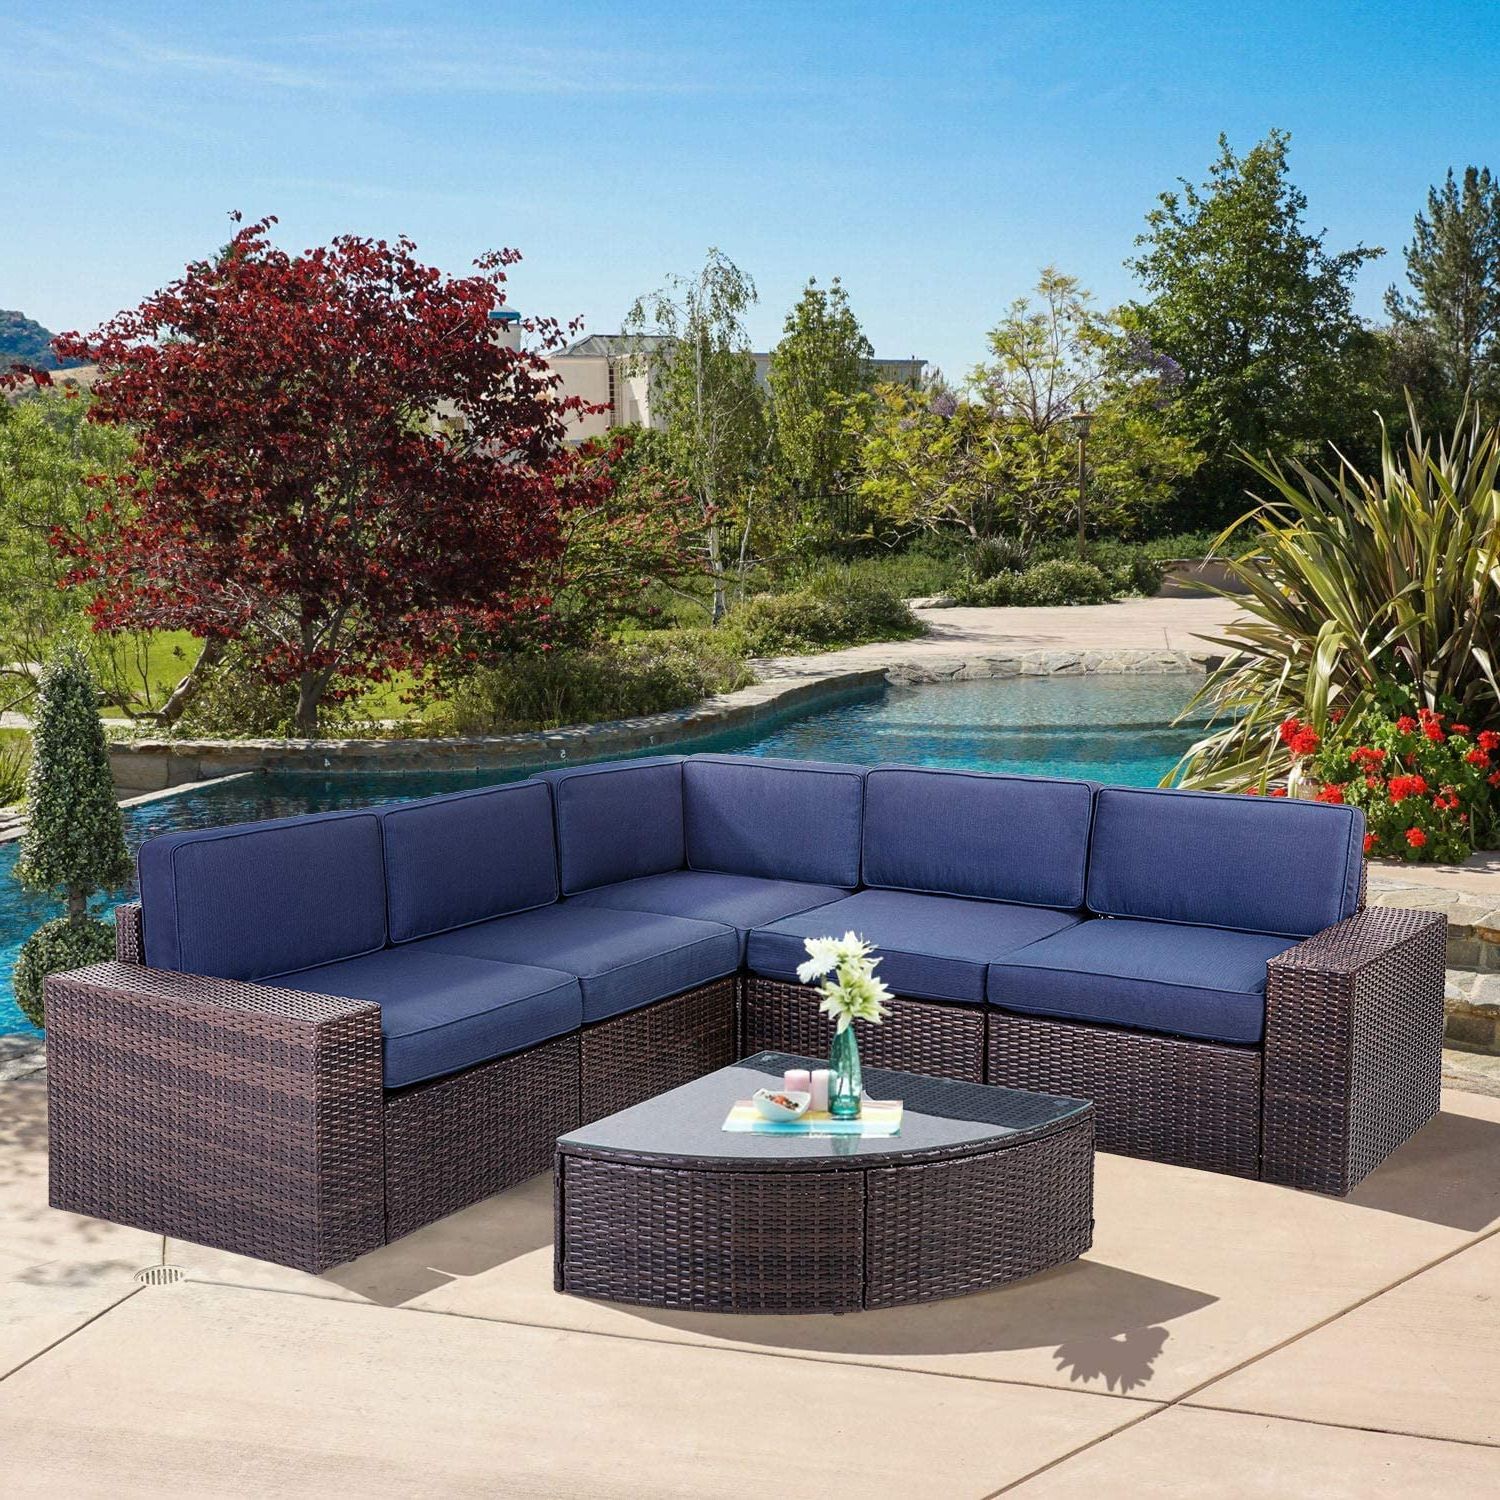 Navy Outdoor Seating Sets For Newest Suncrown Outdoor Furniture 6 Piece Patio Sofa And Wedge Table Set, All (View 14 of 15)